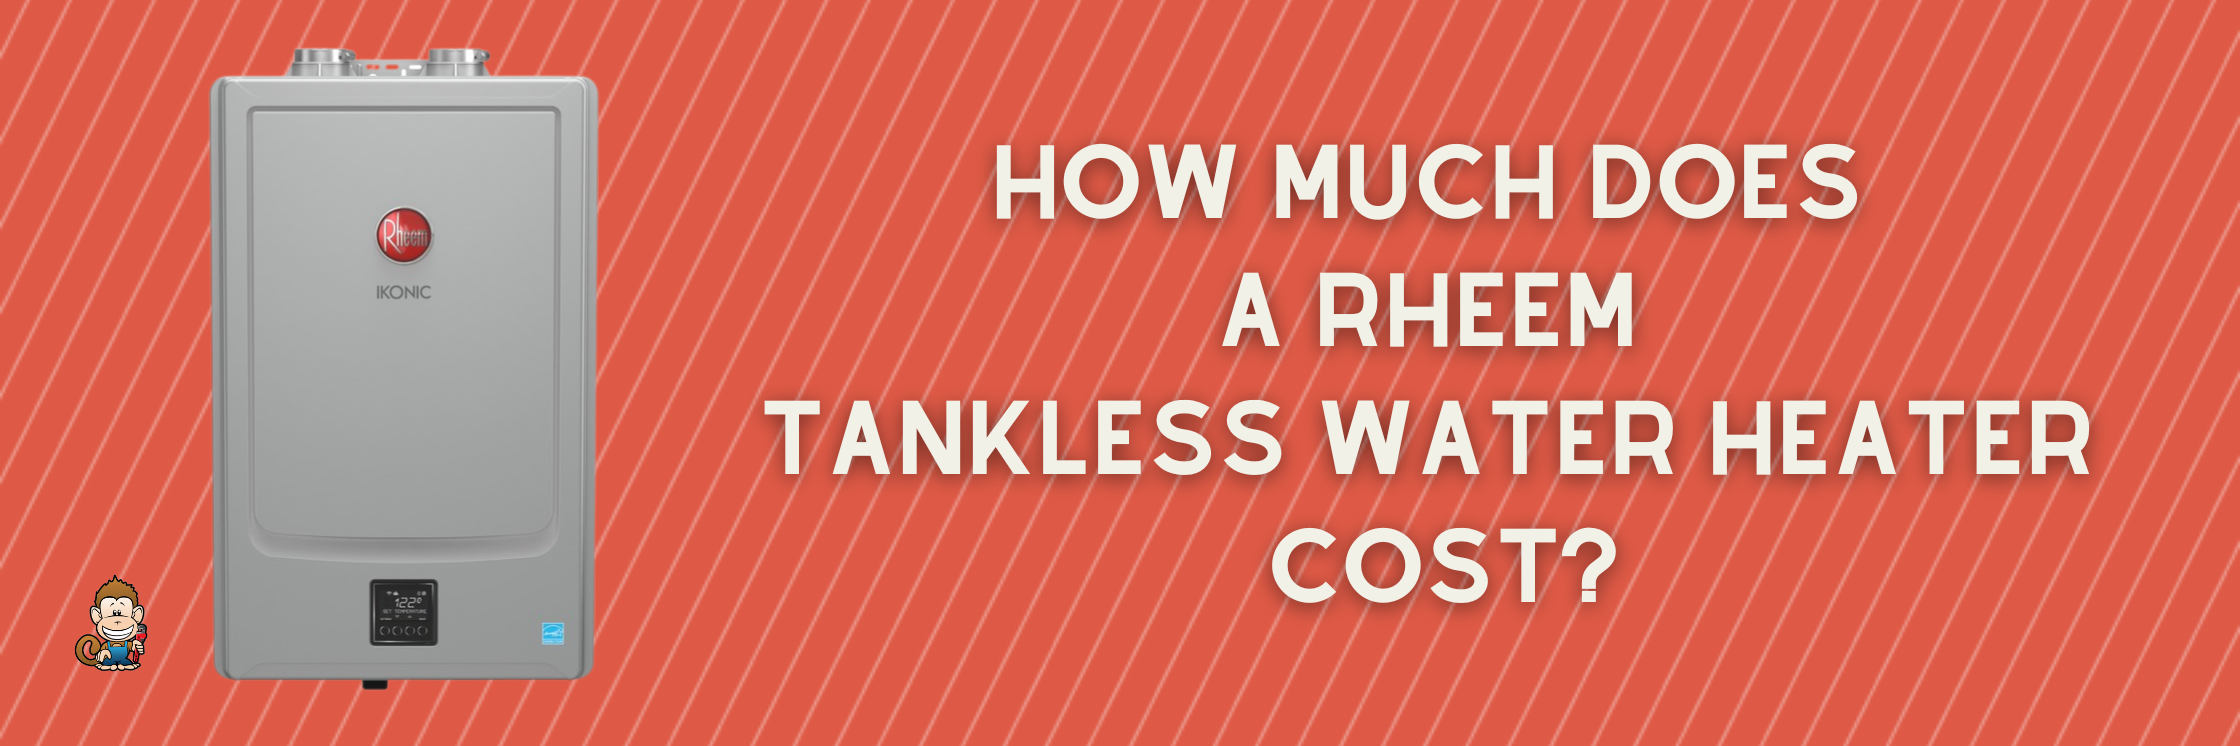 How Much Does a Rheem Tankless Water Heater Cost?